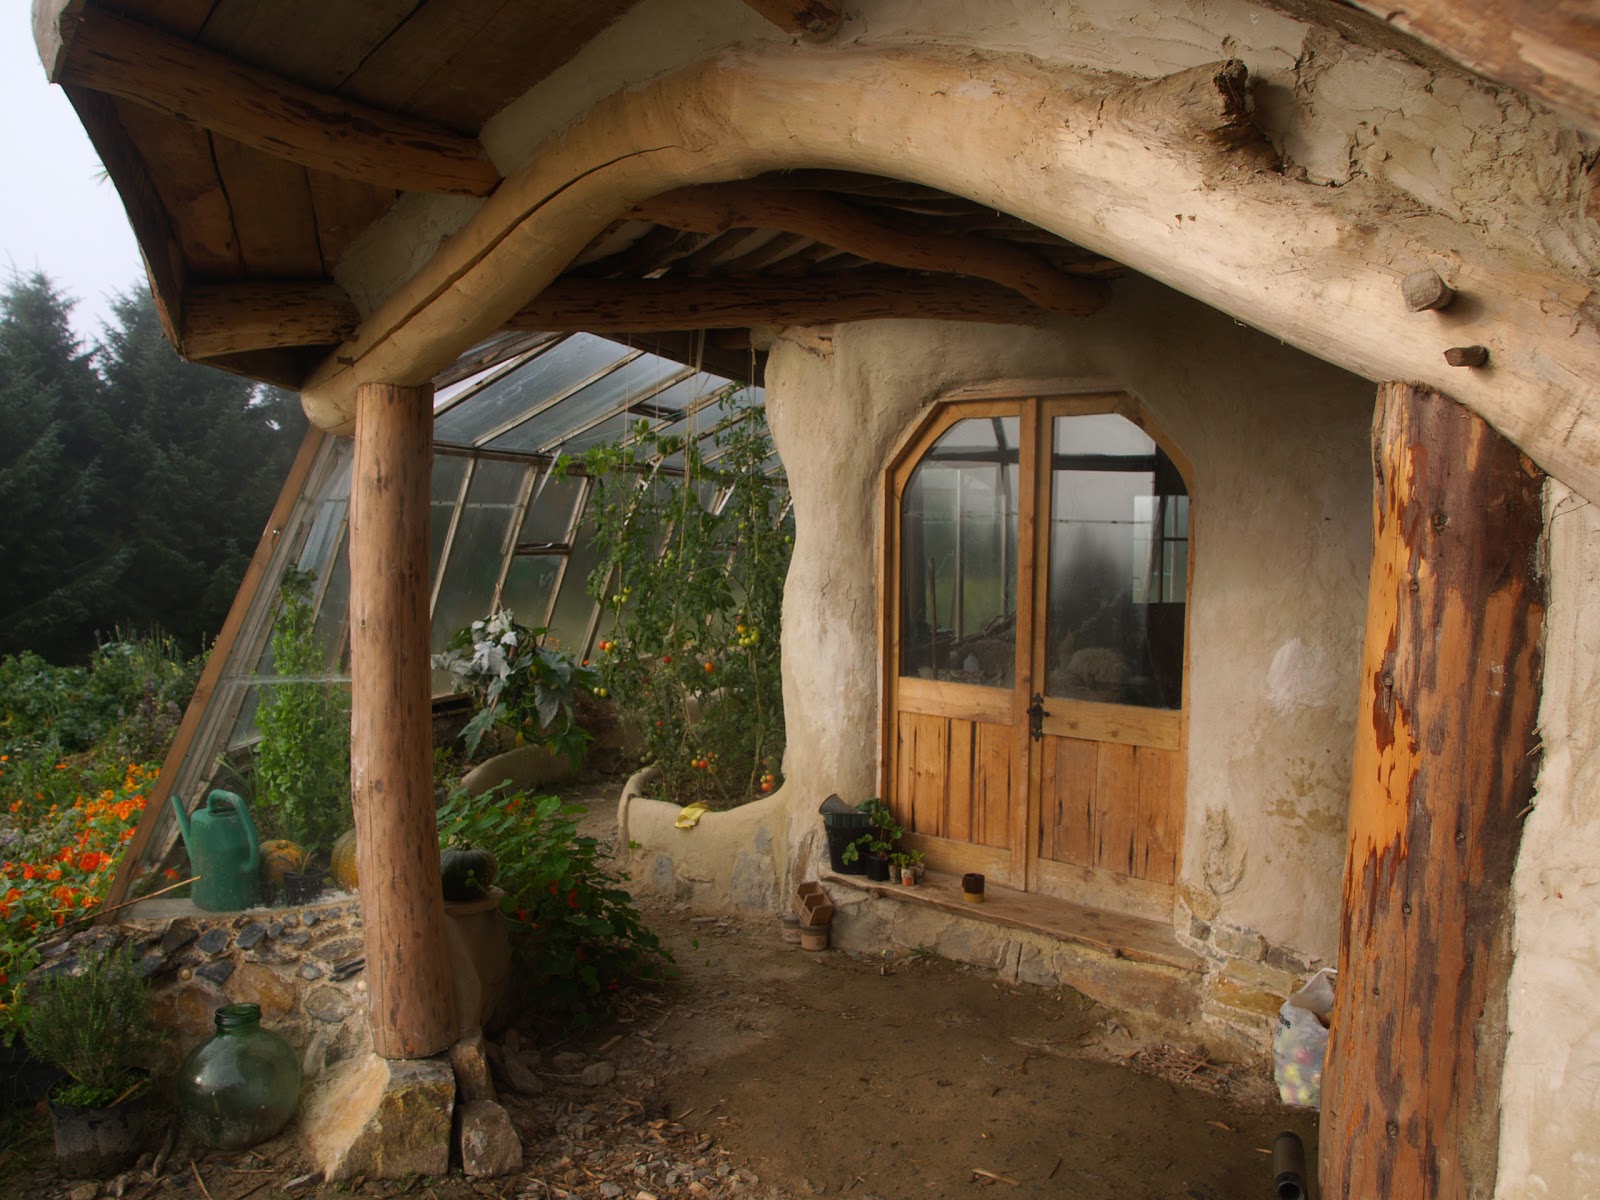 Eclectitude: A Hobbit House in Wales